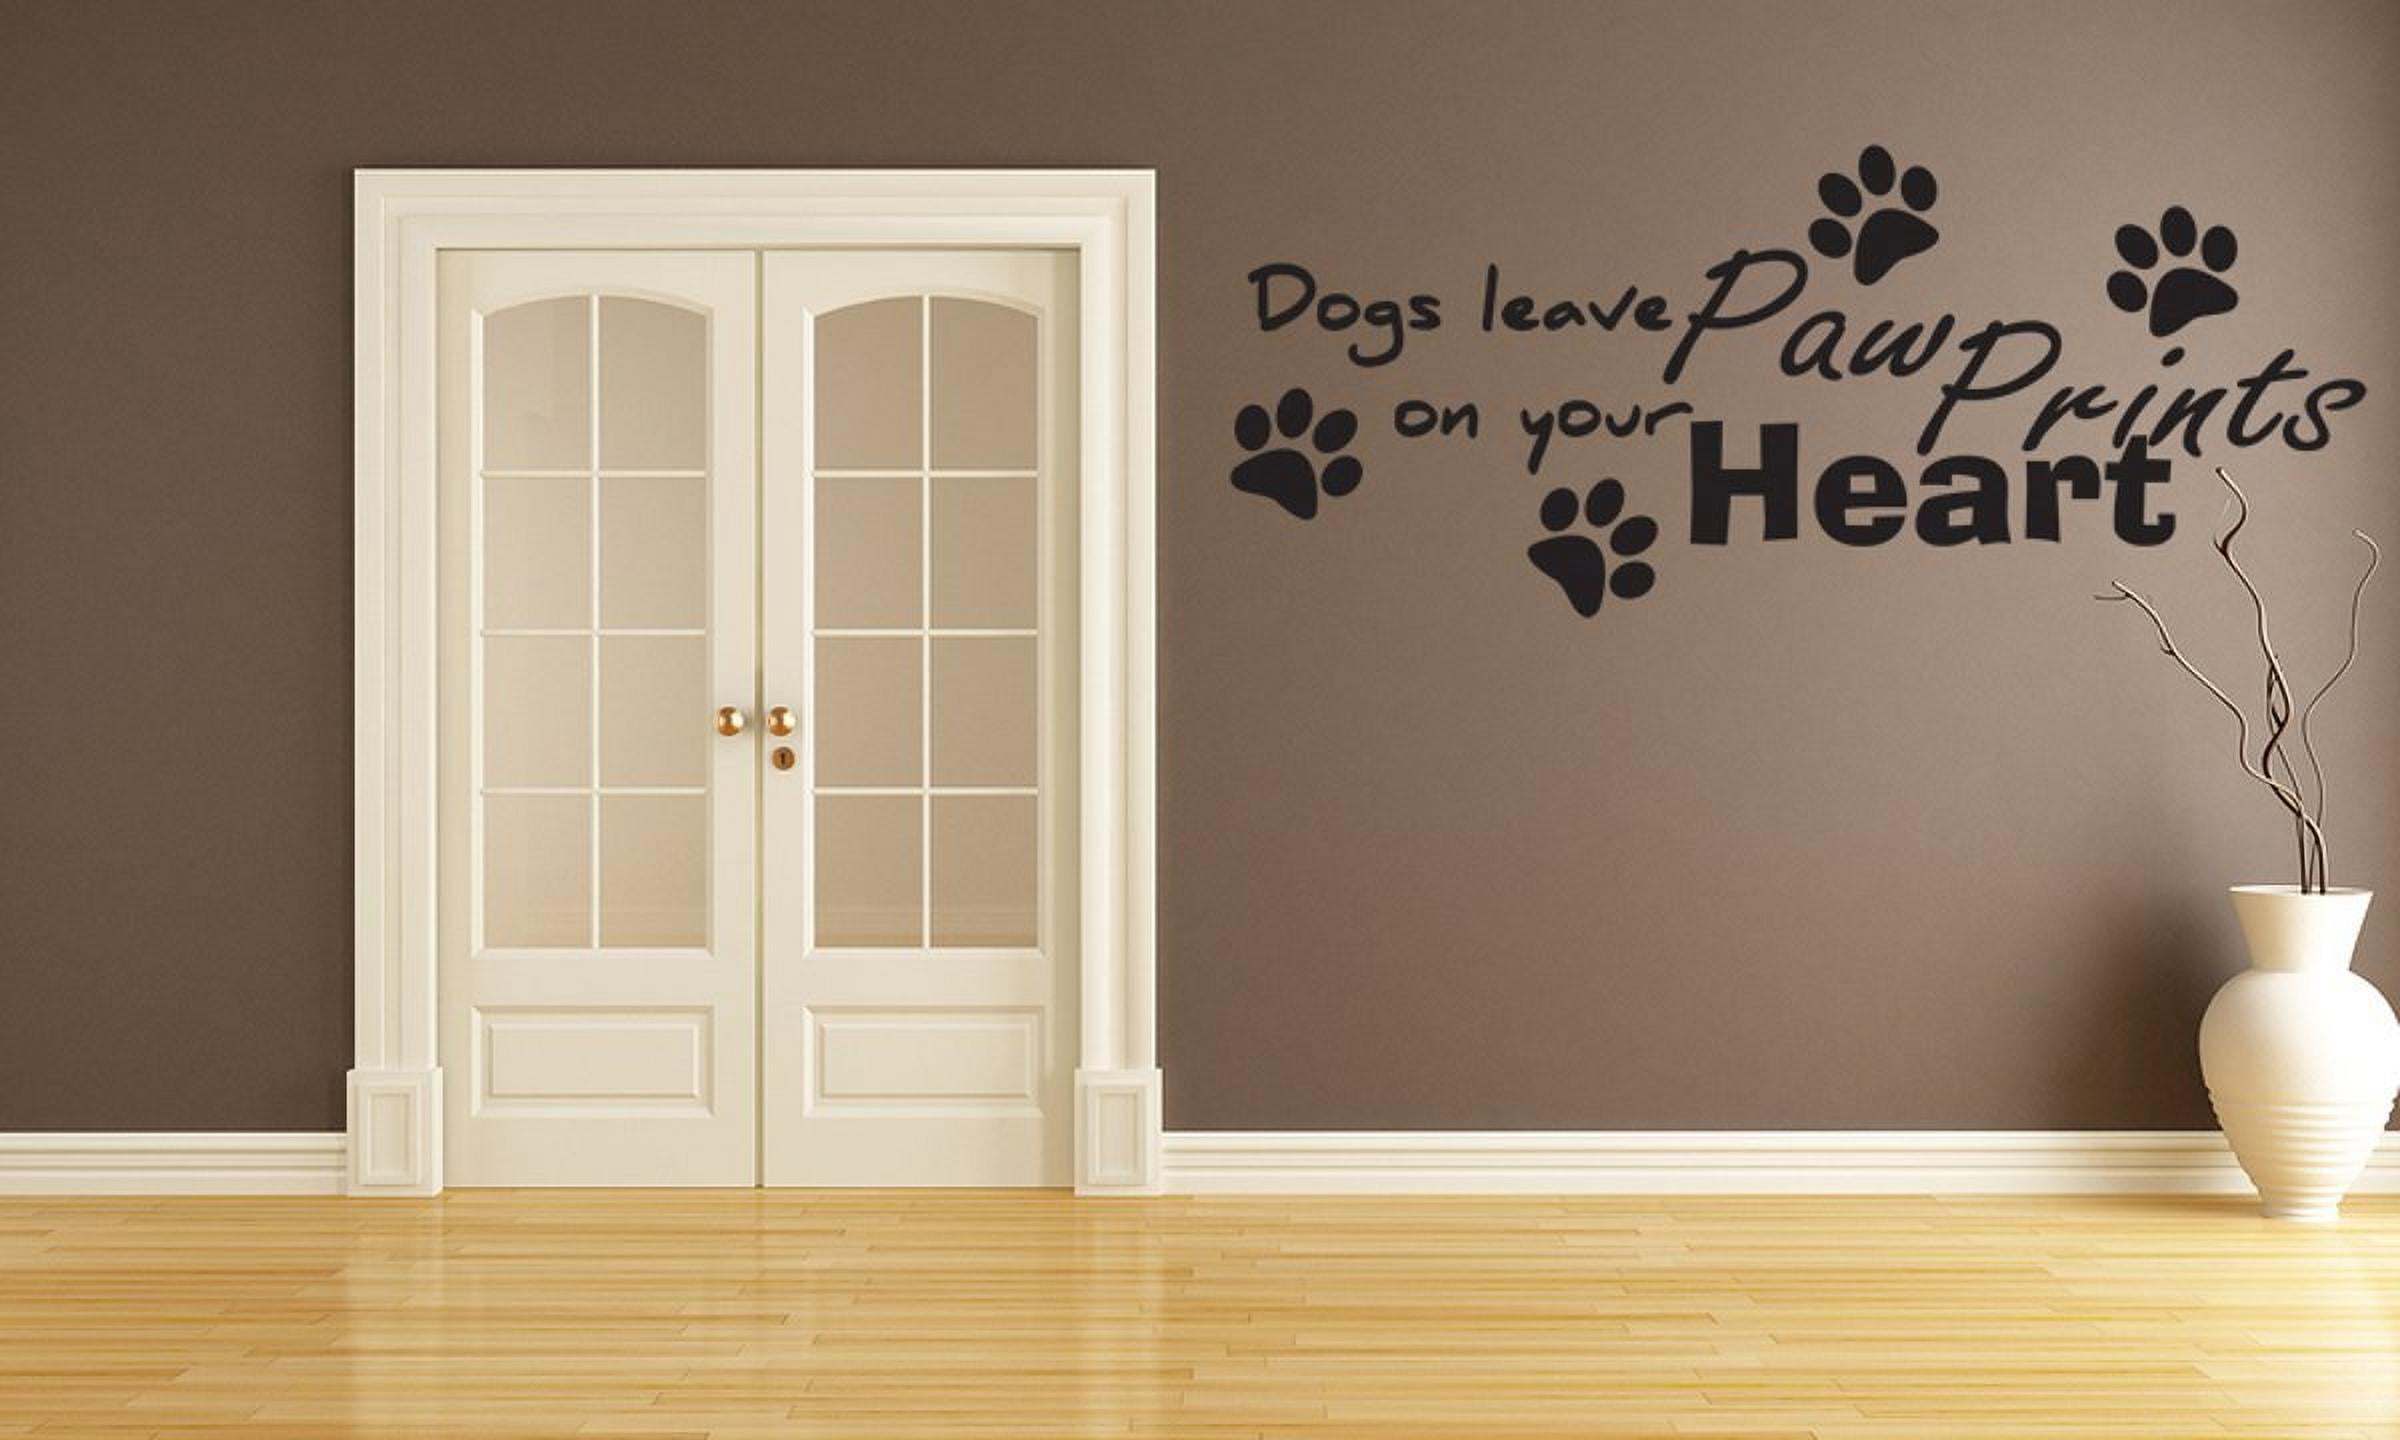 Dog Inspiration Wall Sticker Pets Leave Paw Prints Quote Vinyl Removable Decor 